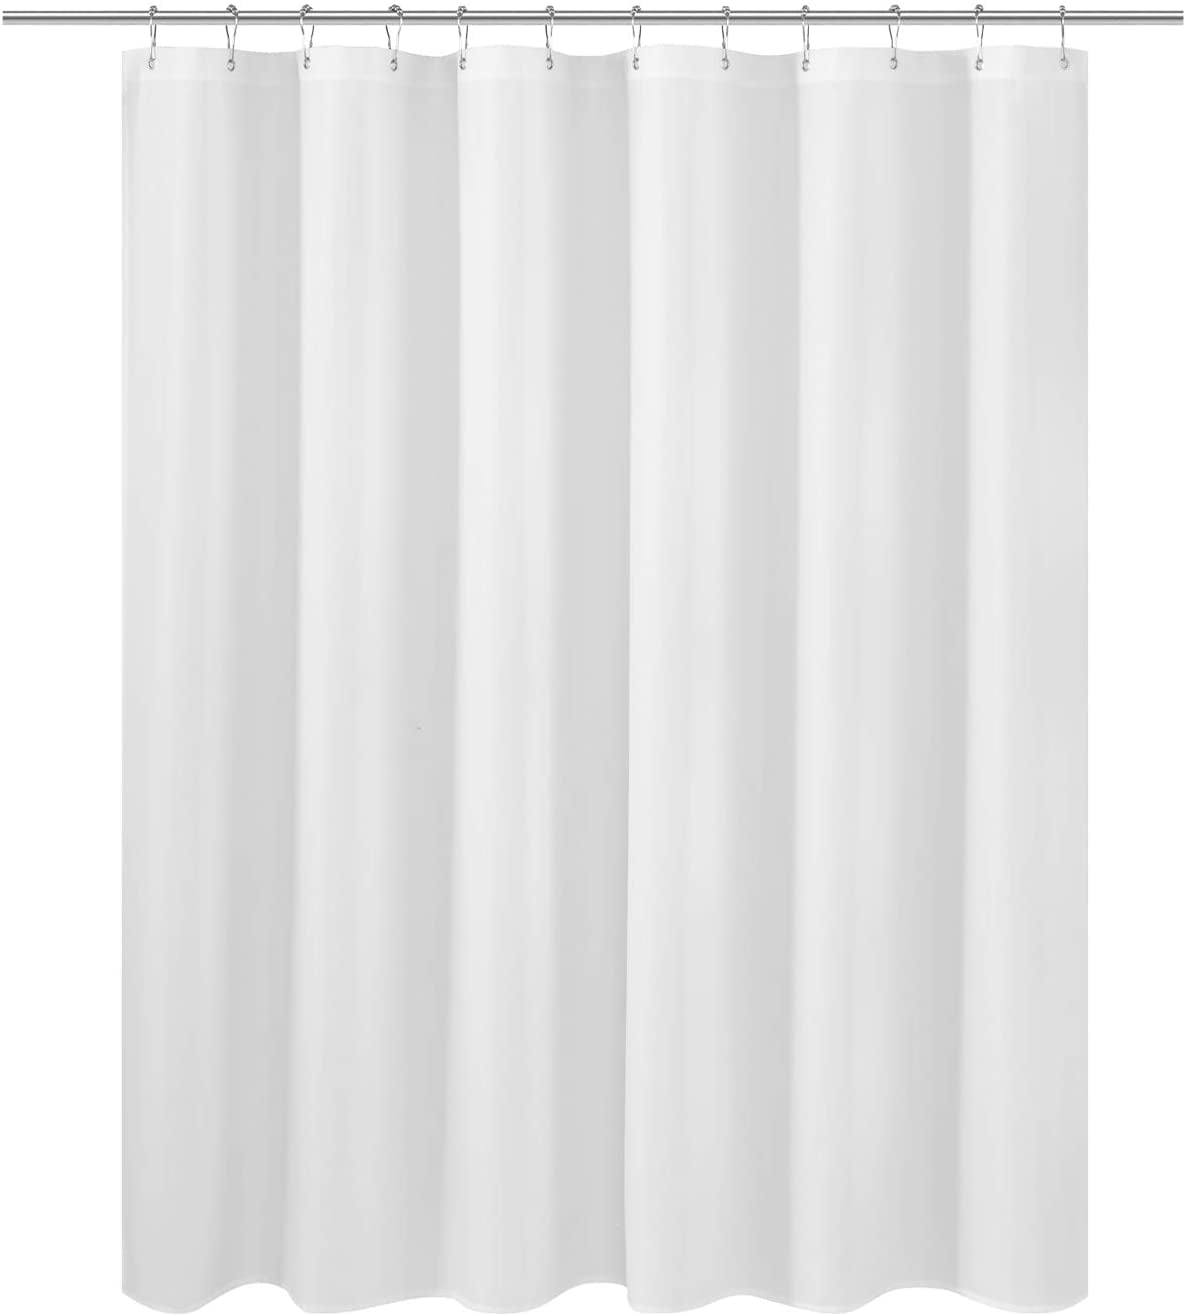 Fabric Shower Curtain Liner 60 Inches, Shower Curtain With Pockets Ikea